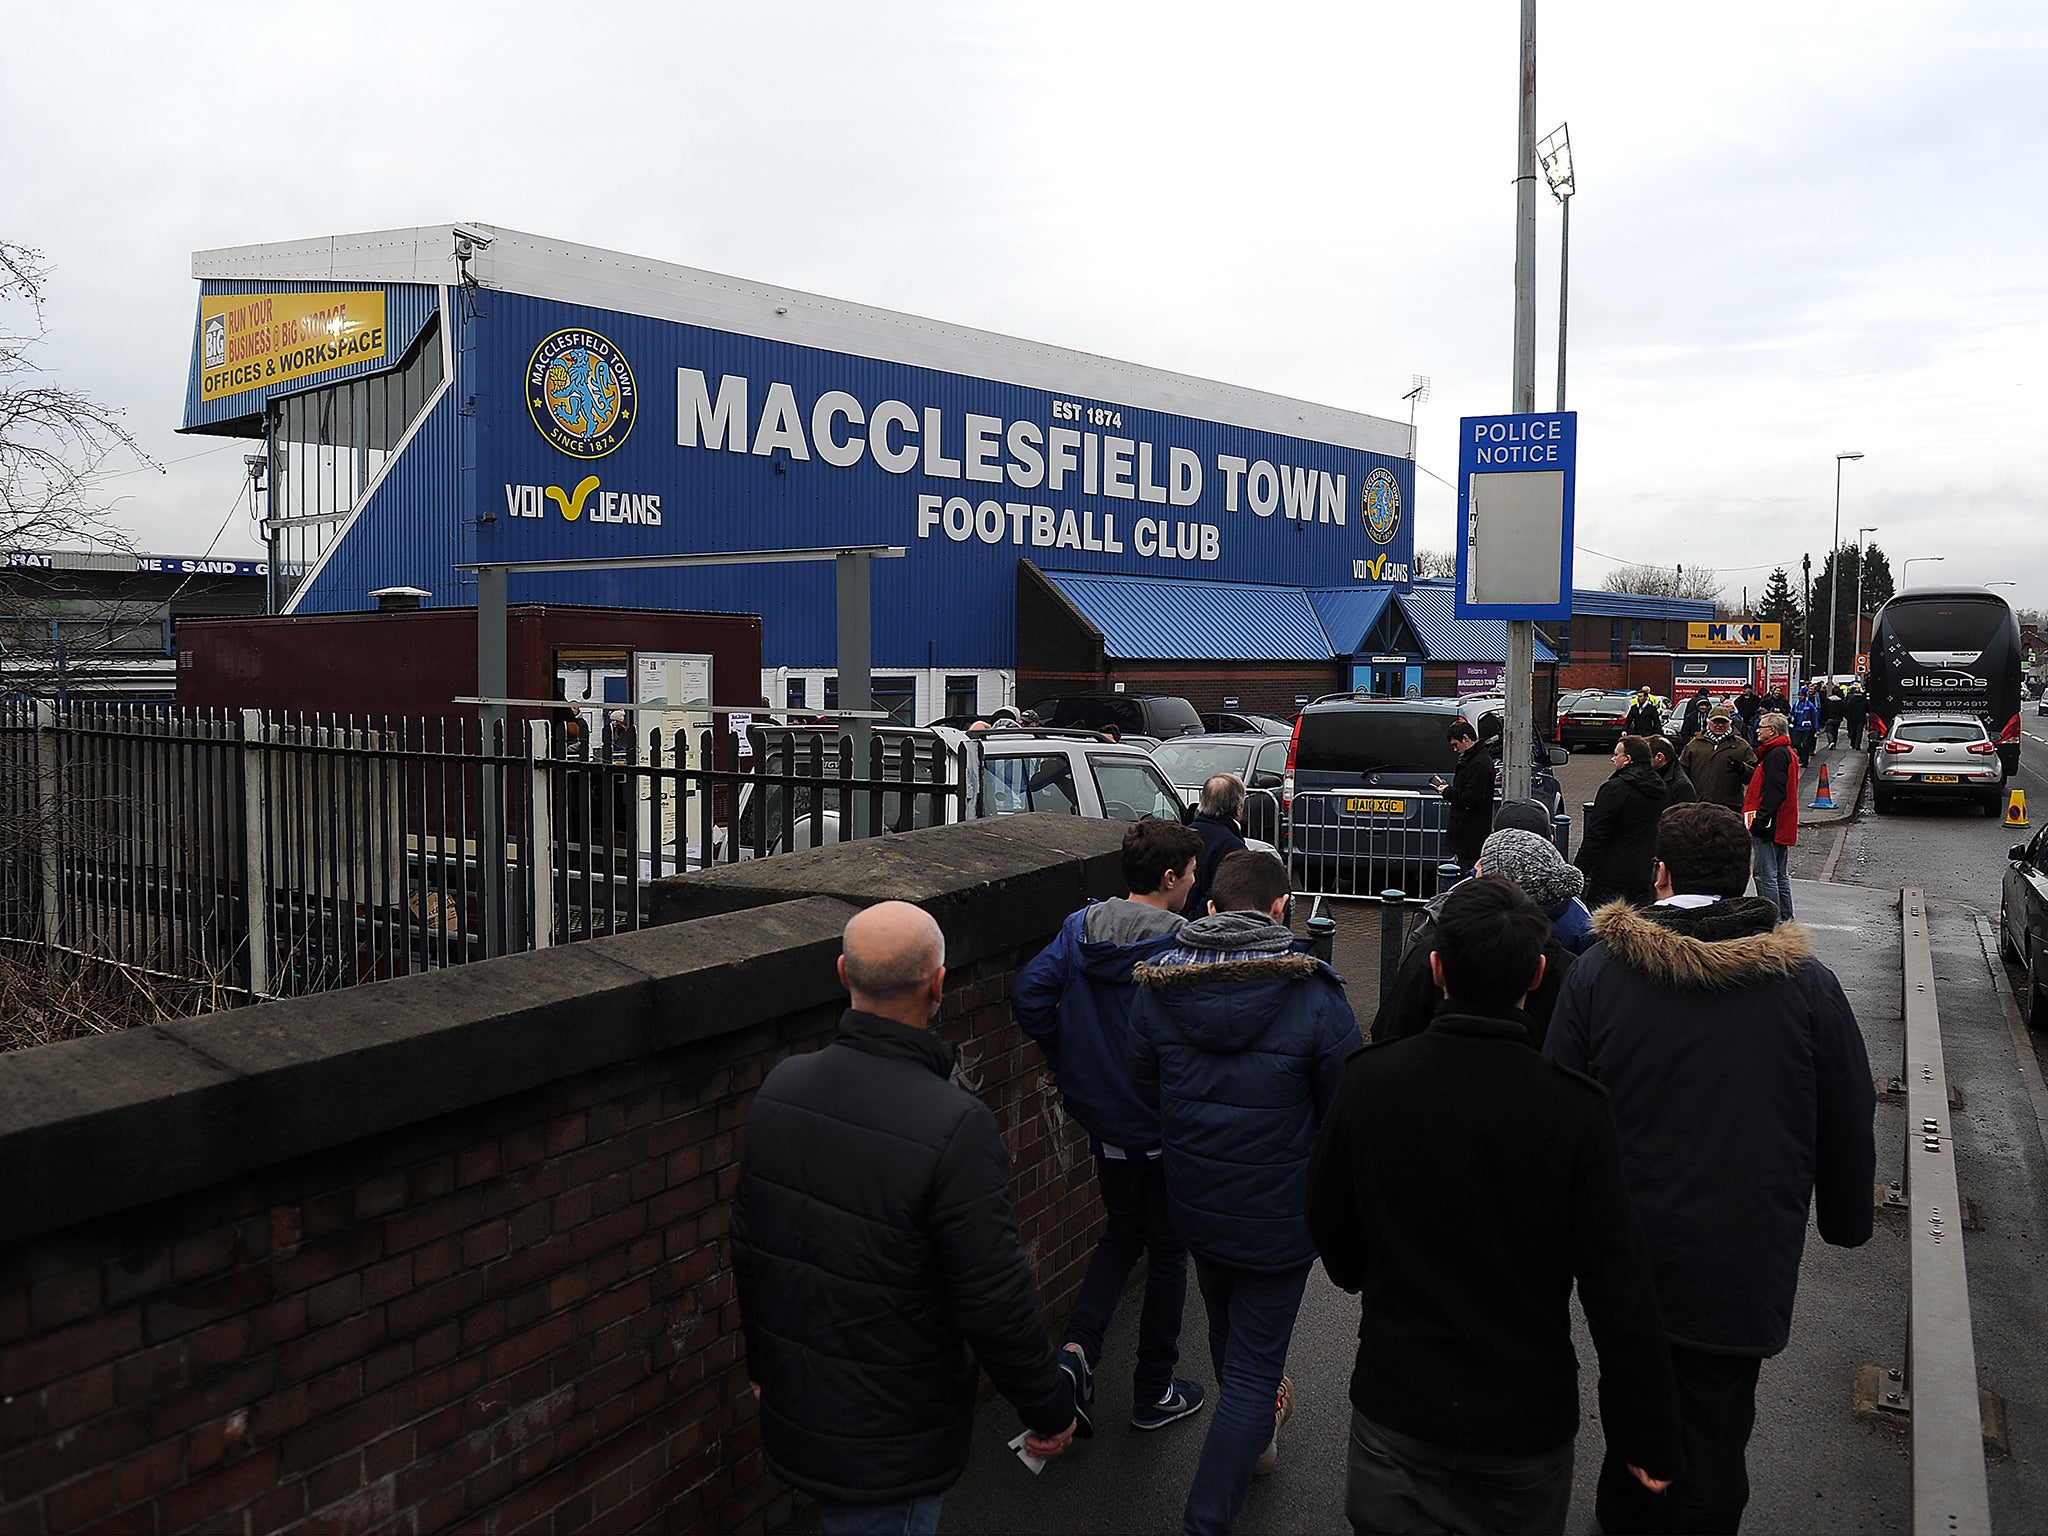 Macclesfield's Moss Road Stadium could host the Fifa World Cup final